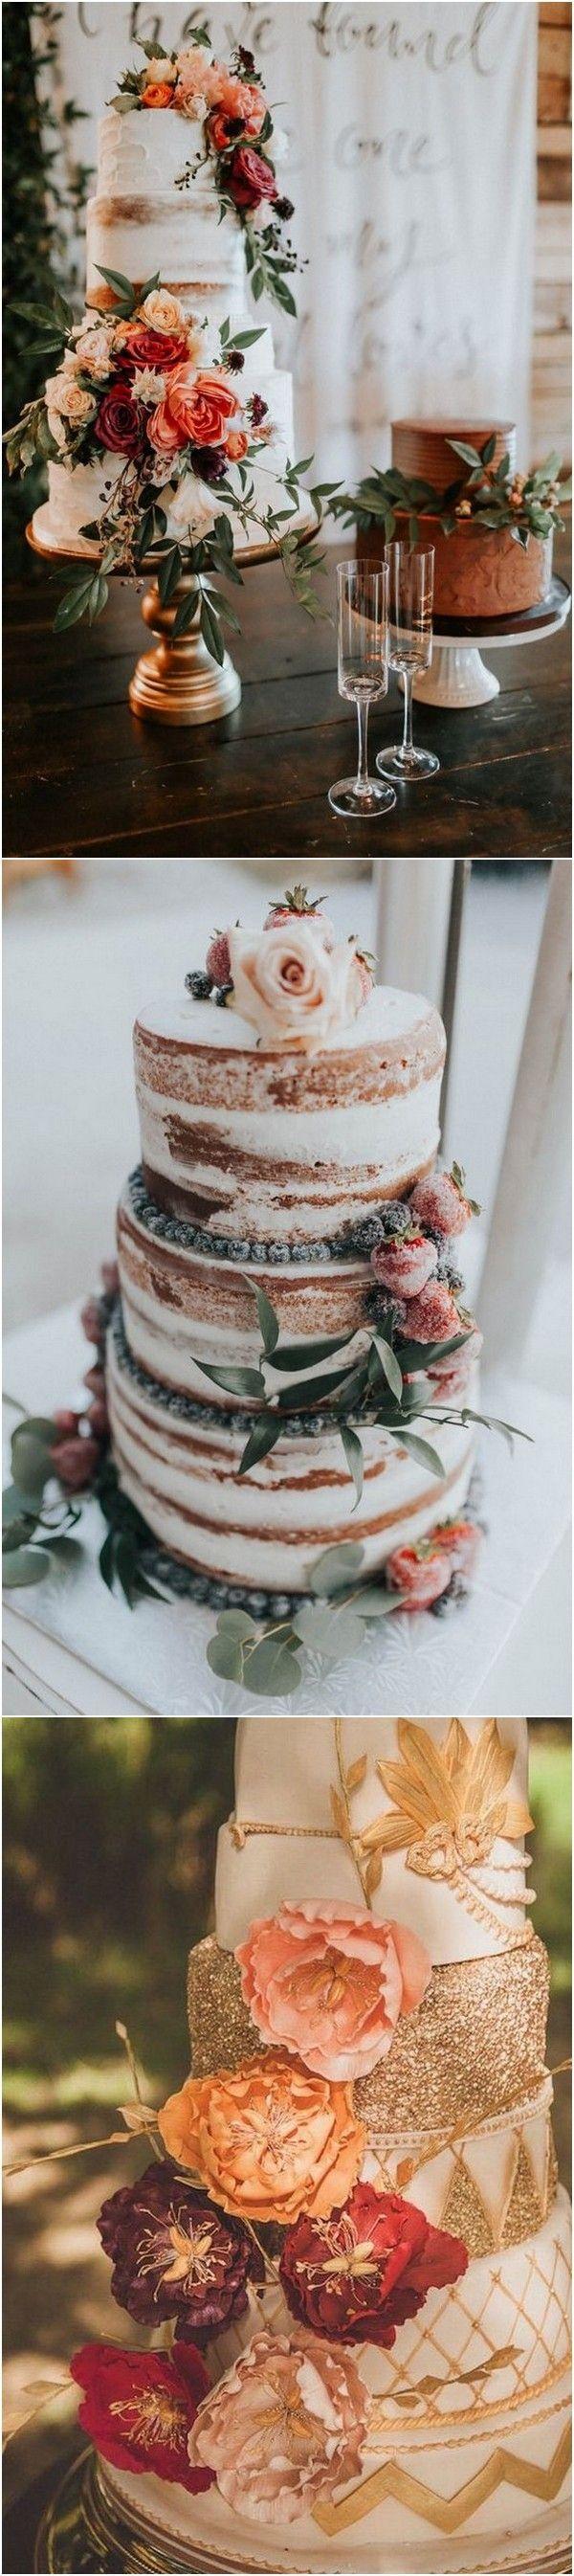 Hochzeit - Top 20 Gorgeous Wedding Cakes For Fall 2018 - Page 3 Of 3